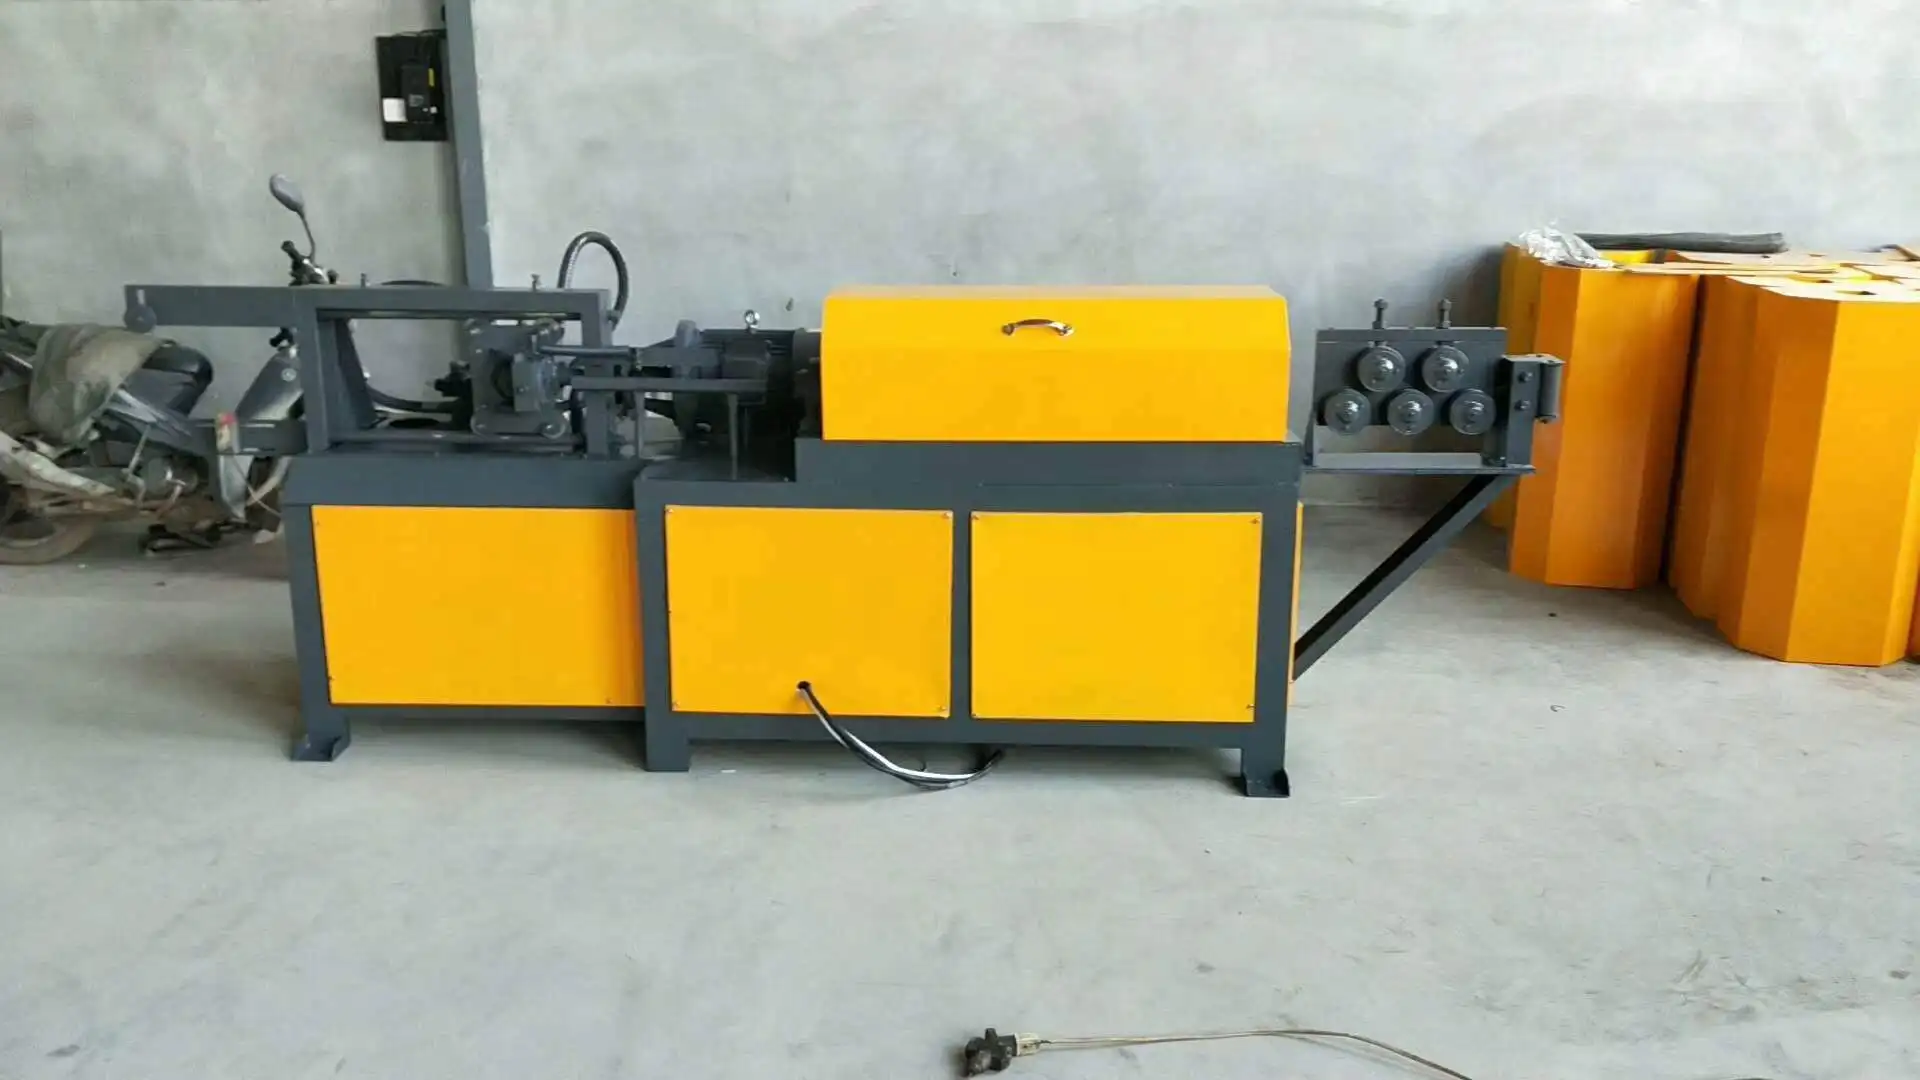 Coiling Rebar Straightening and Cutting Machine, Rebar Straightener and Cutter Wire Machinery Repair Shops Spare Parts Provided